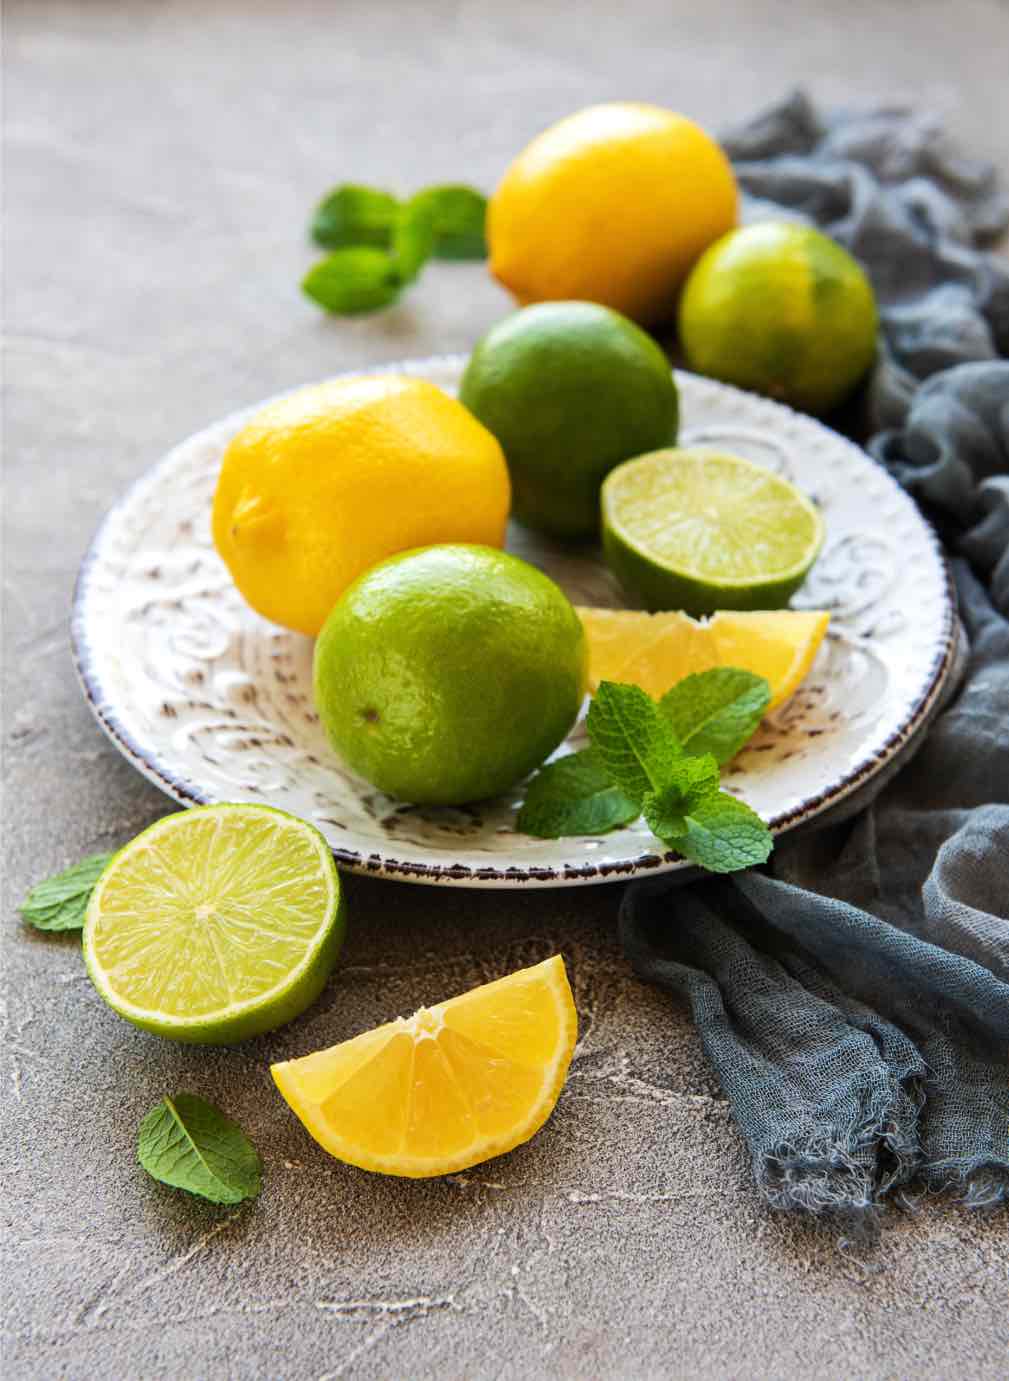 Lemons and limes are great for humans, but not for dogs - learn more with Dog Training Elite Tooele Valley!